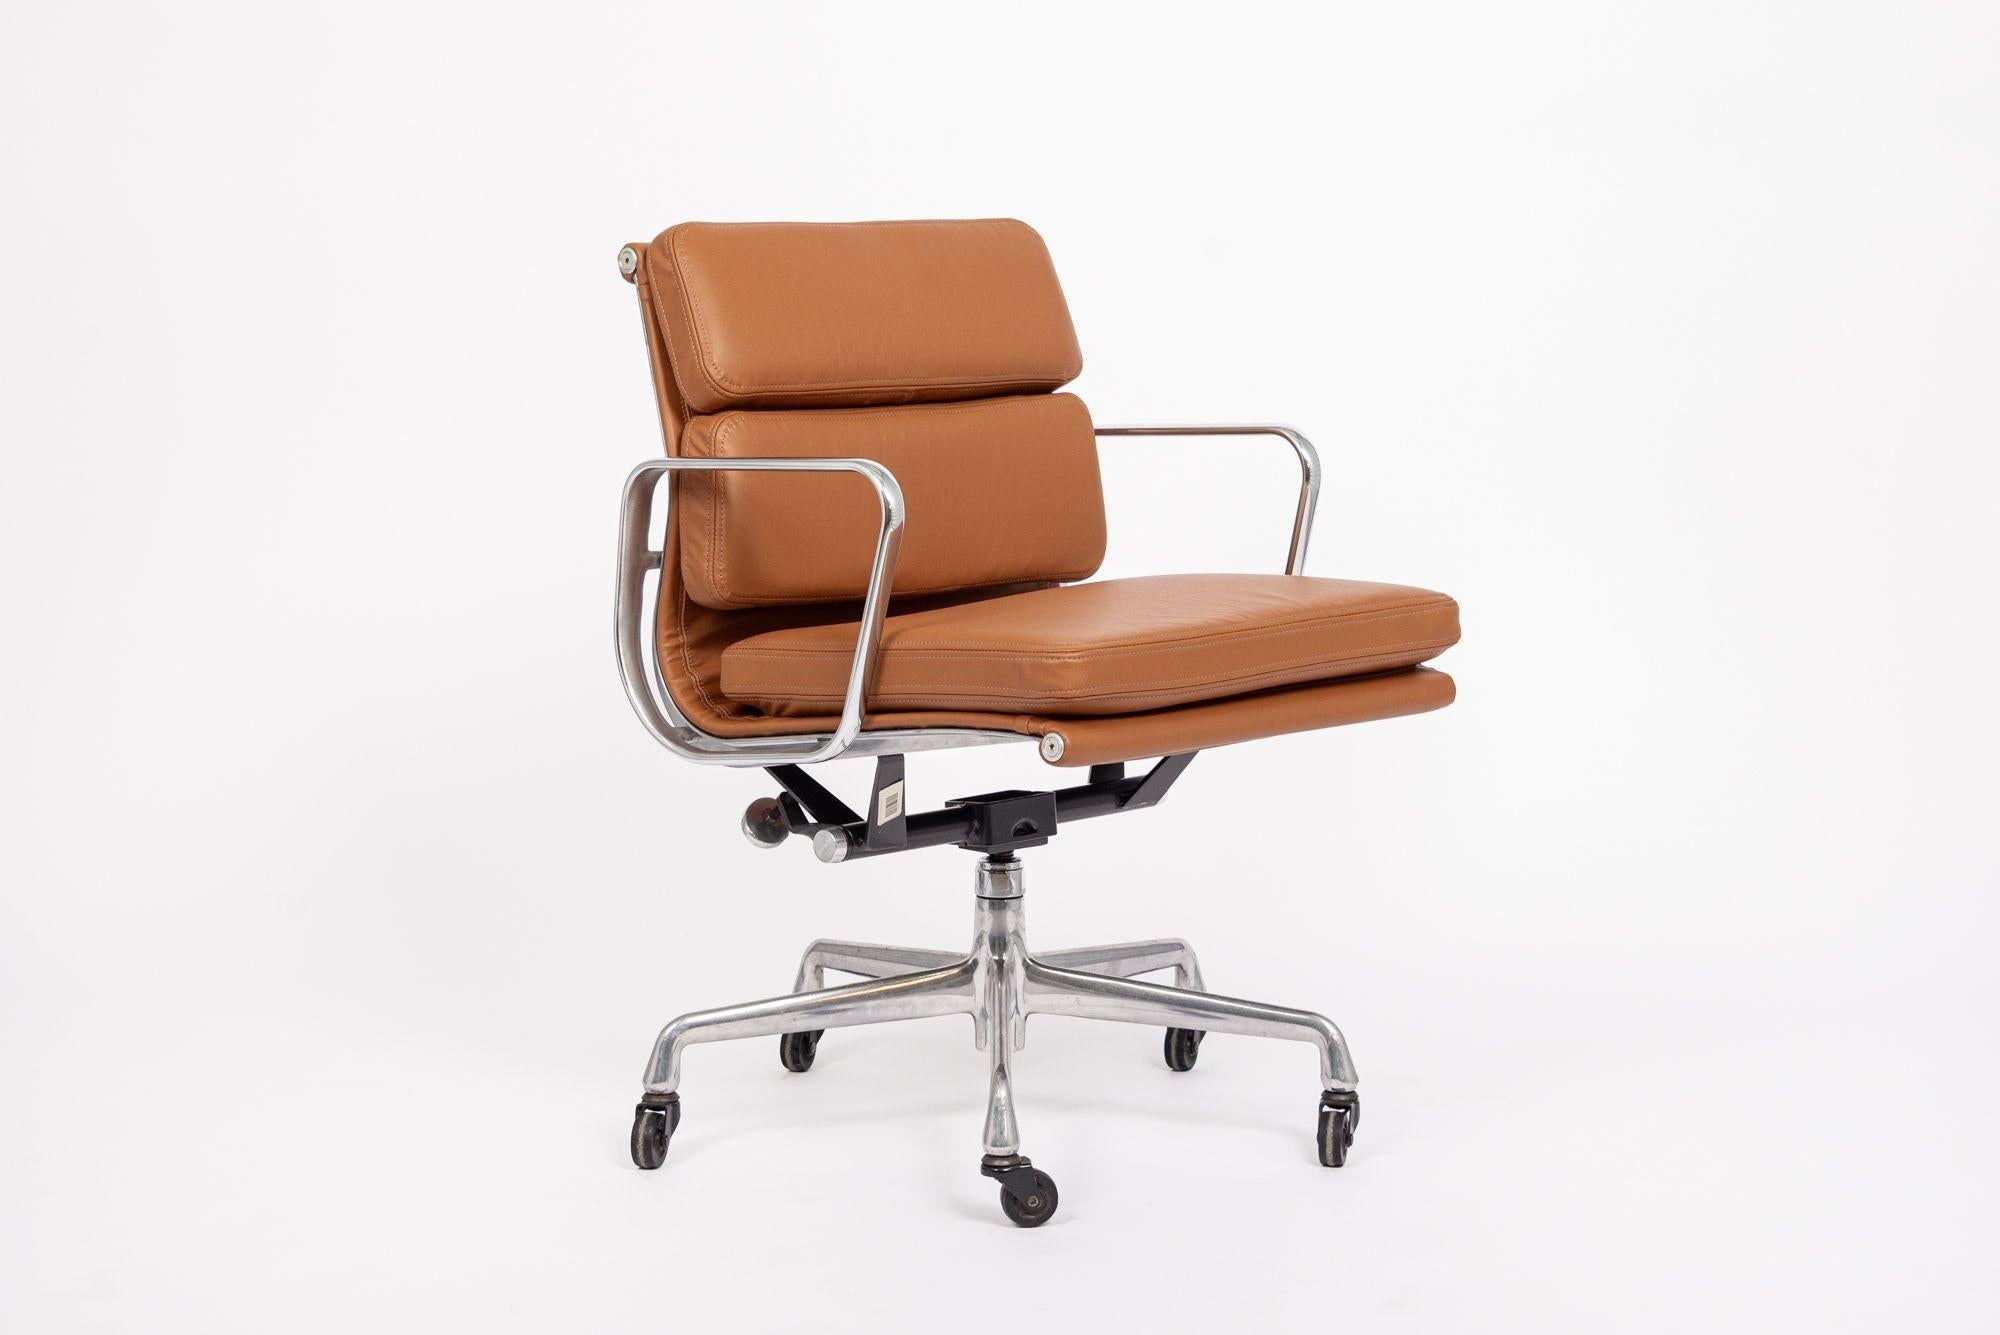 This authentic Eames for Herman Miller Soft Pad Management Height brown leather office chair from the Aluminum Group Collection was manufactured in the 2000s. This classic mid century modern office chair was first introduced in 1969 by Charles and